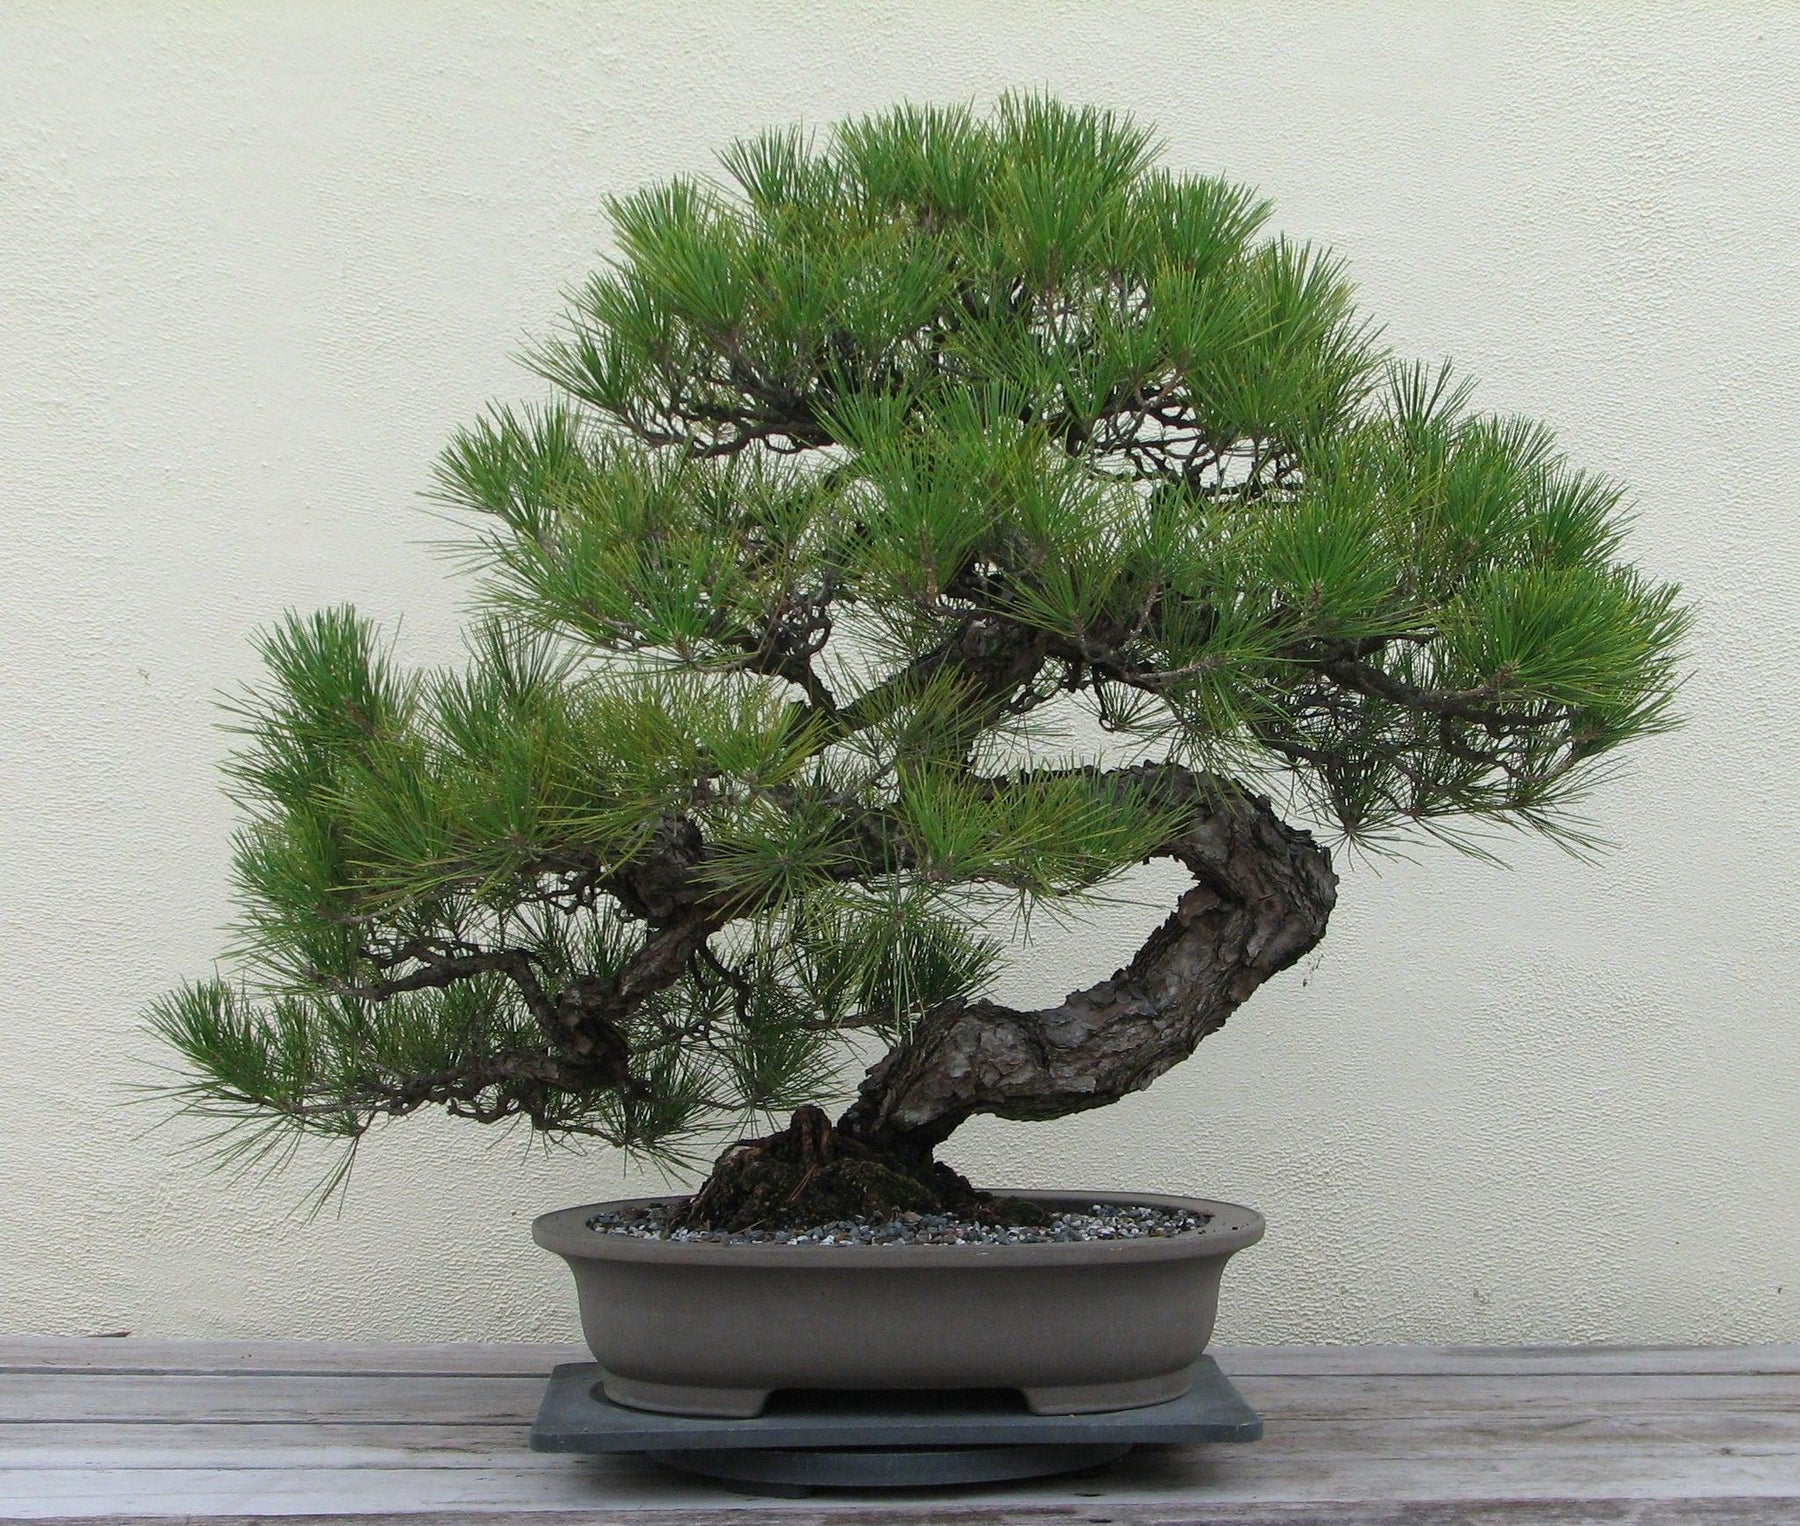 How To Care For Your Japanese Black Pine Bonsai Tree